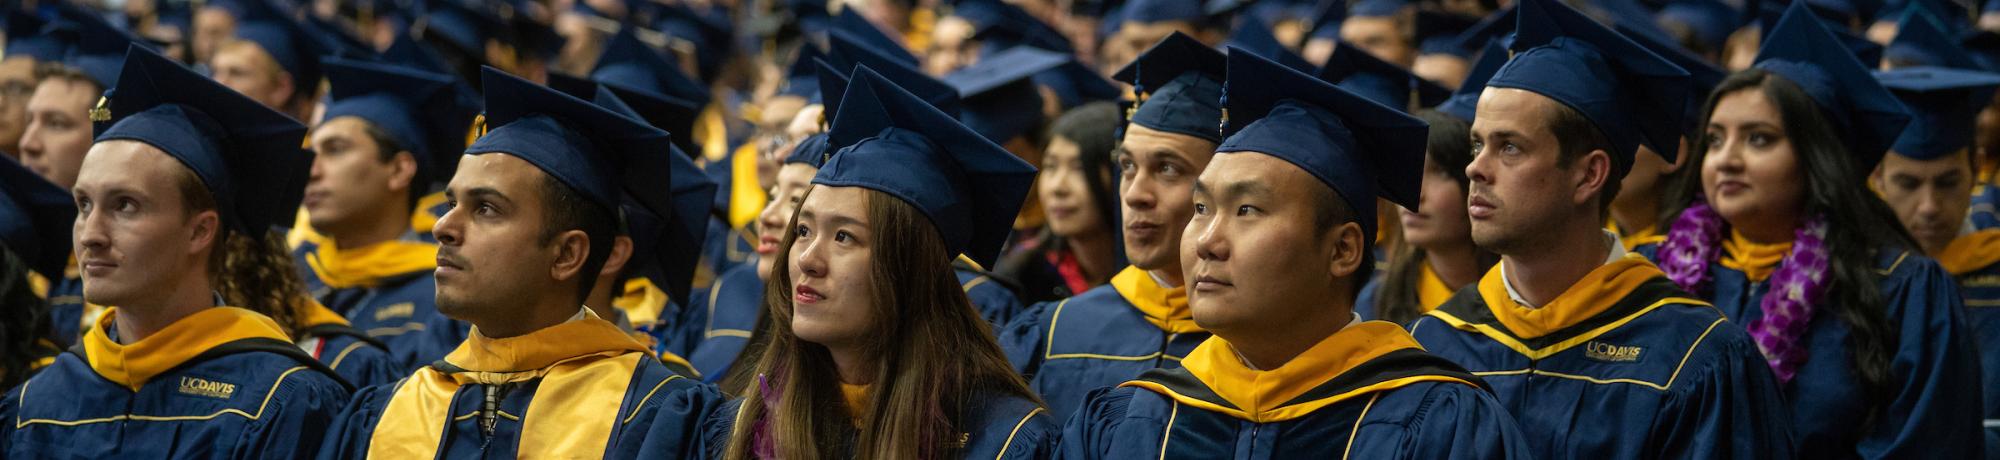 Students wearing academic regalia at the UC Davis commencement ceremony. 